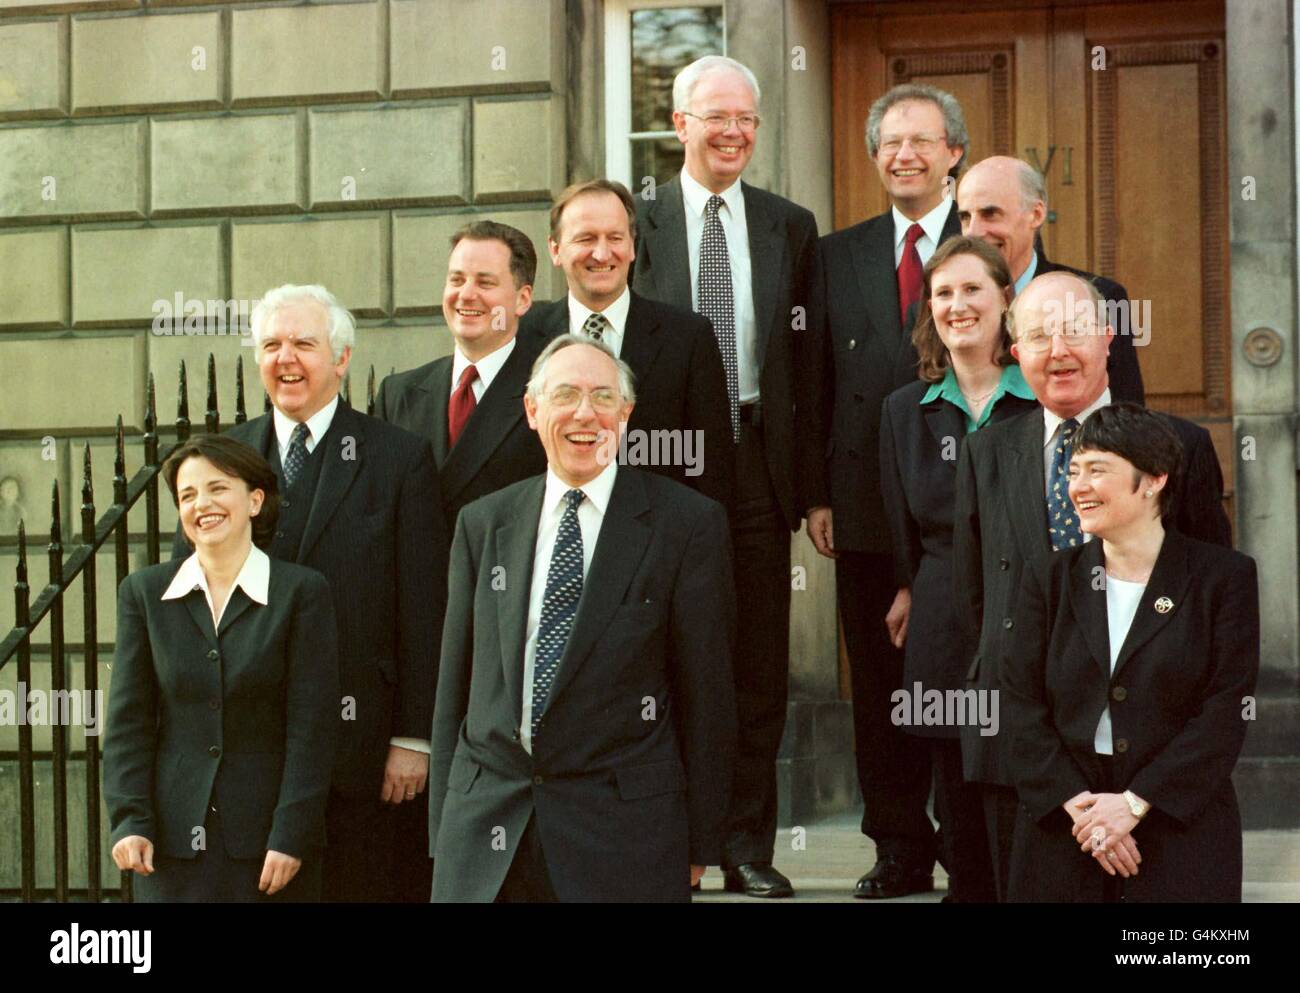 First Minister of Scotland Donald Dewar (front) & his first cabinet to serve in the Labour/Liberal Democrat coalition. (l/r) Wendy Alexander, Lord Hardie, Jack McConnell, Tom McCabe, Jim Wallace , Henry McLeish, Sam Gabraith, Susan Deacon, Ross Finnie, Sarah Boyack. * Wendy Alexander (Communities) Lord Hardie (Lord Advocate) Jack McConnell (Finance) Tom McCabe (Business Manager) Jim Wallace (Deputy First Minister and justice) Henry McLeish (Enterprise) Sam Gabraith (Education) Susan Deacon (Health) Ross Finnie (Rural Affairs) Sarah Boyack (Transport and Enviroment). Stock Photo